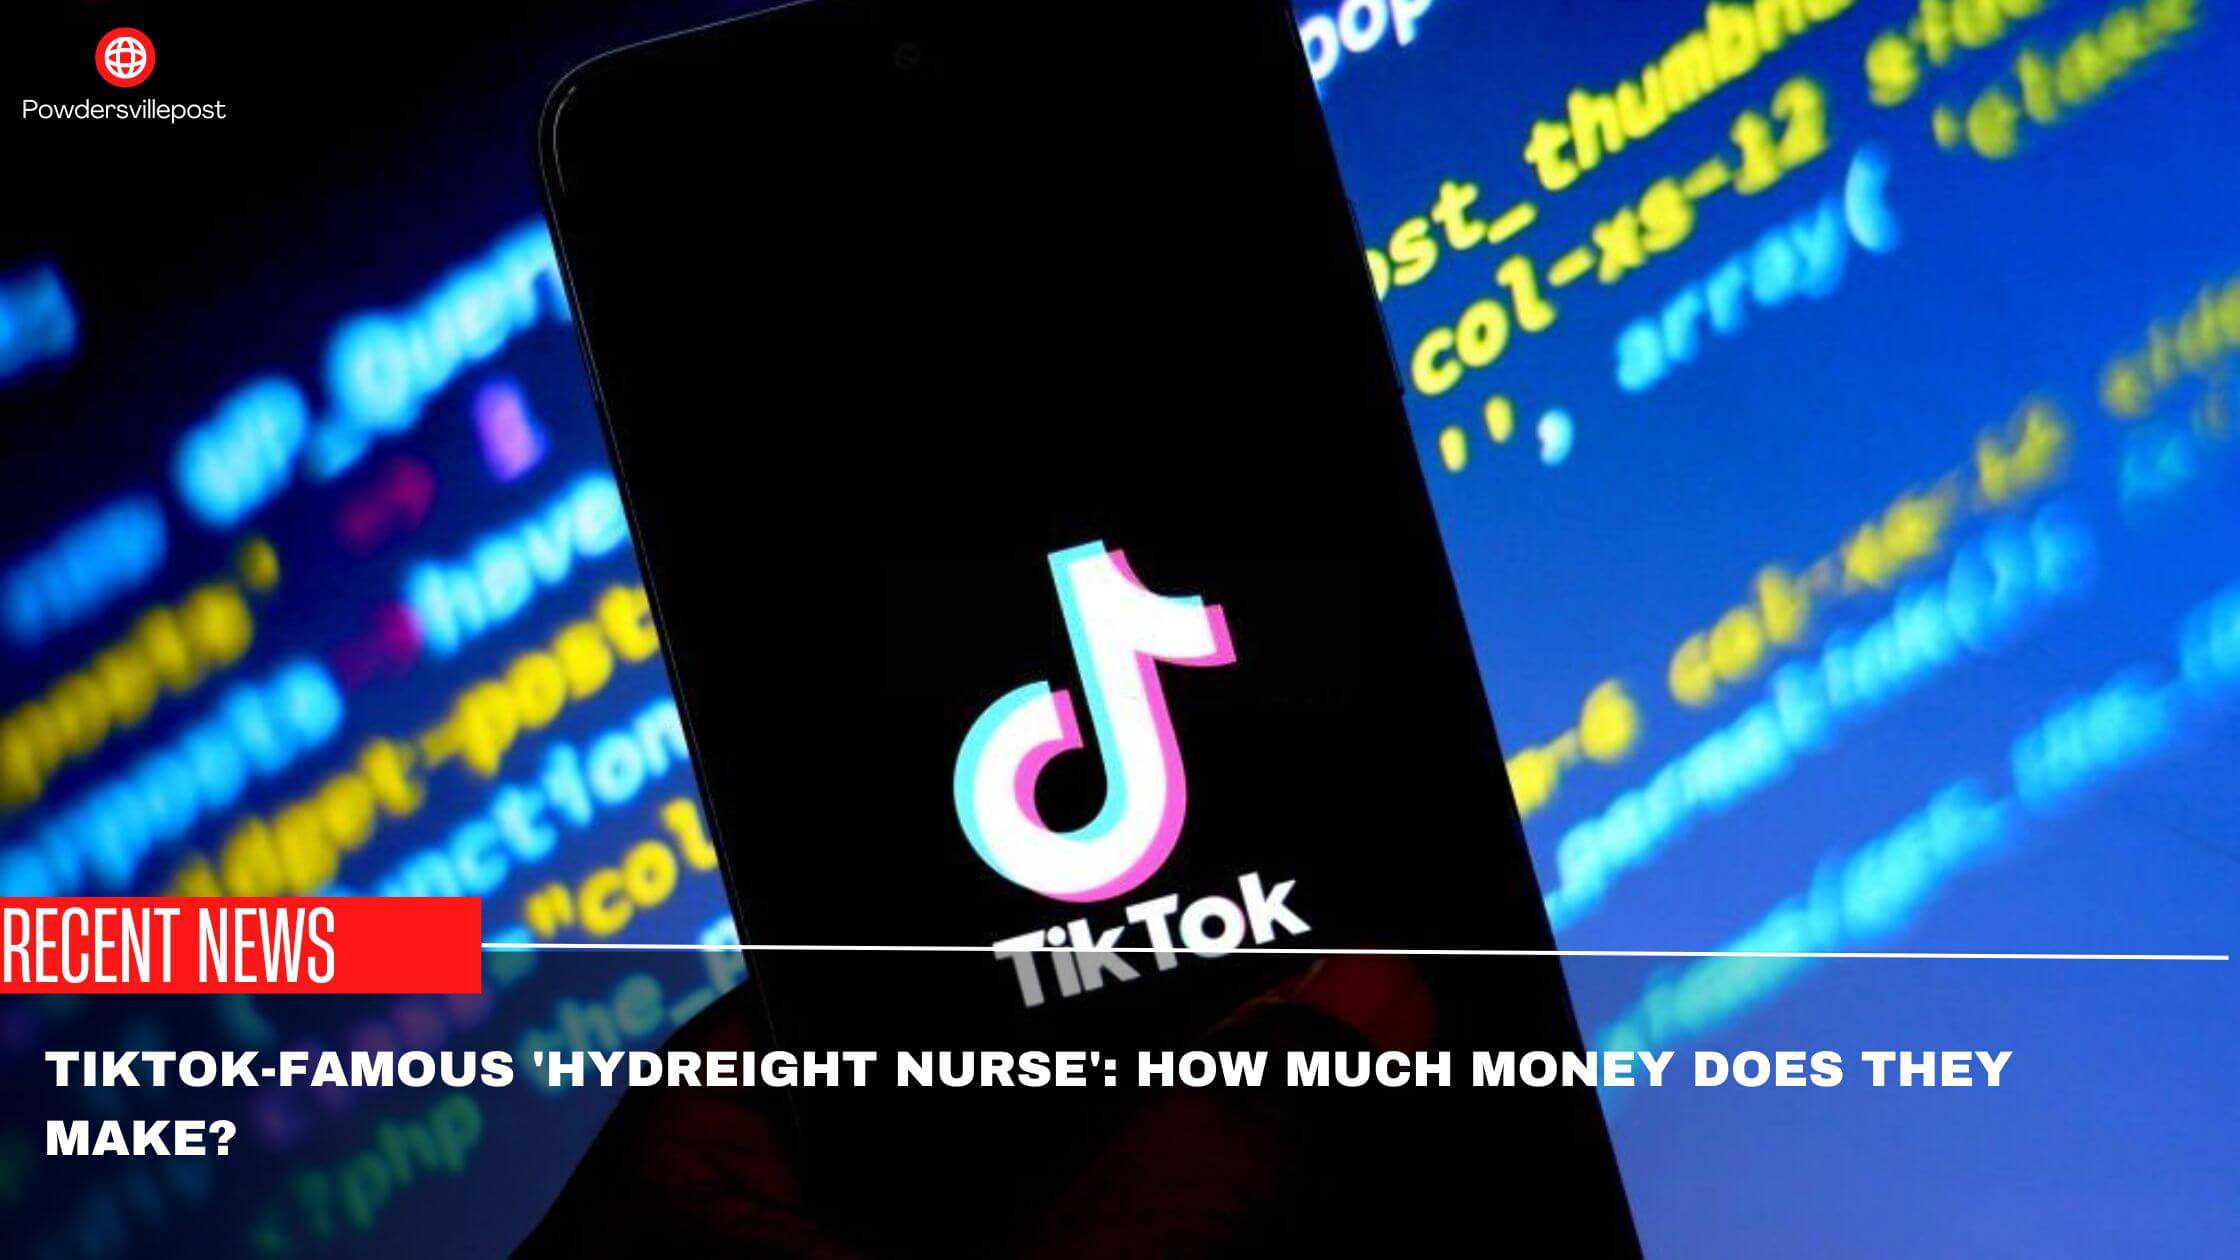 Tiktok-Famous 'Hydreight Nurse' How Much Money Does They Make